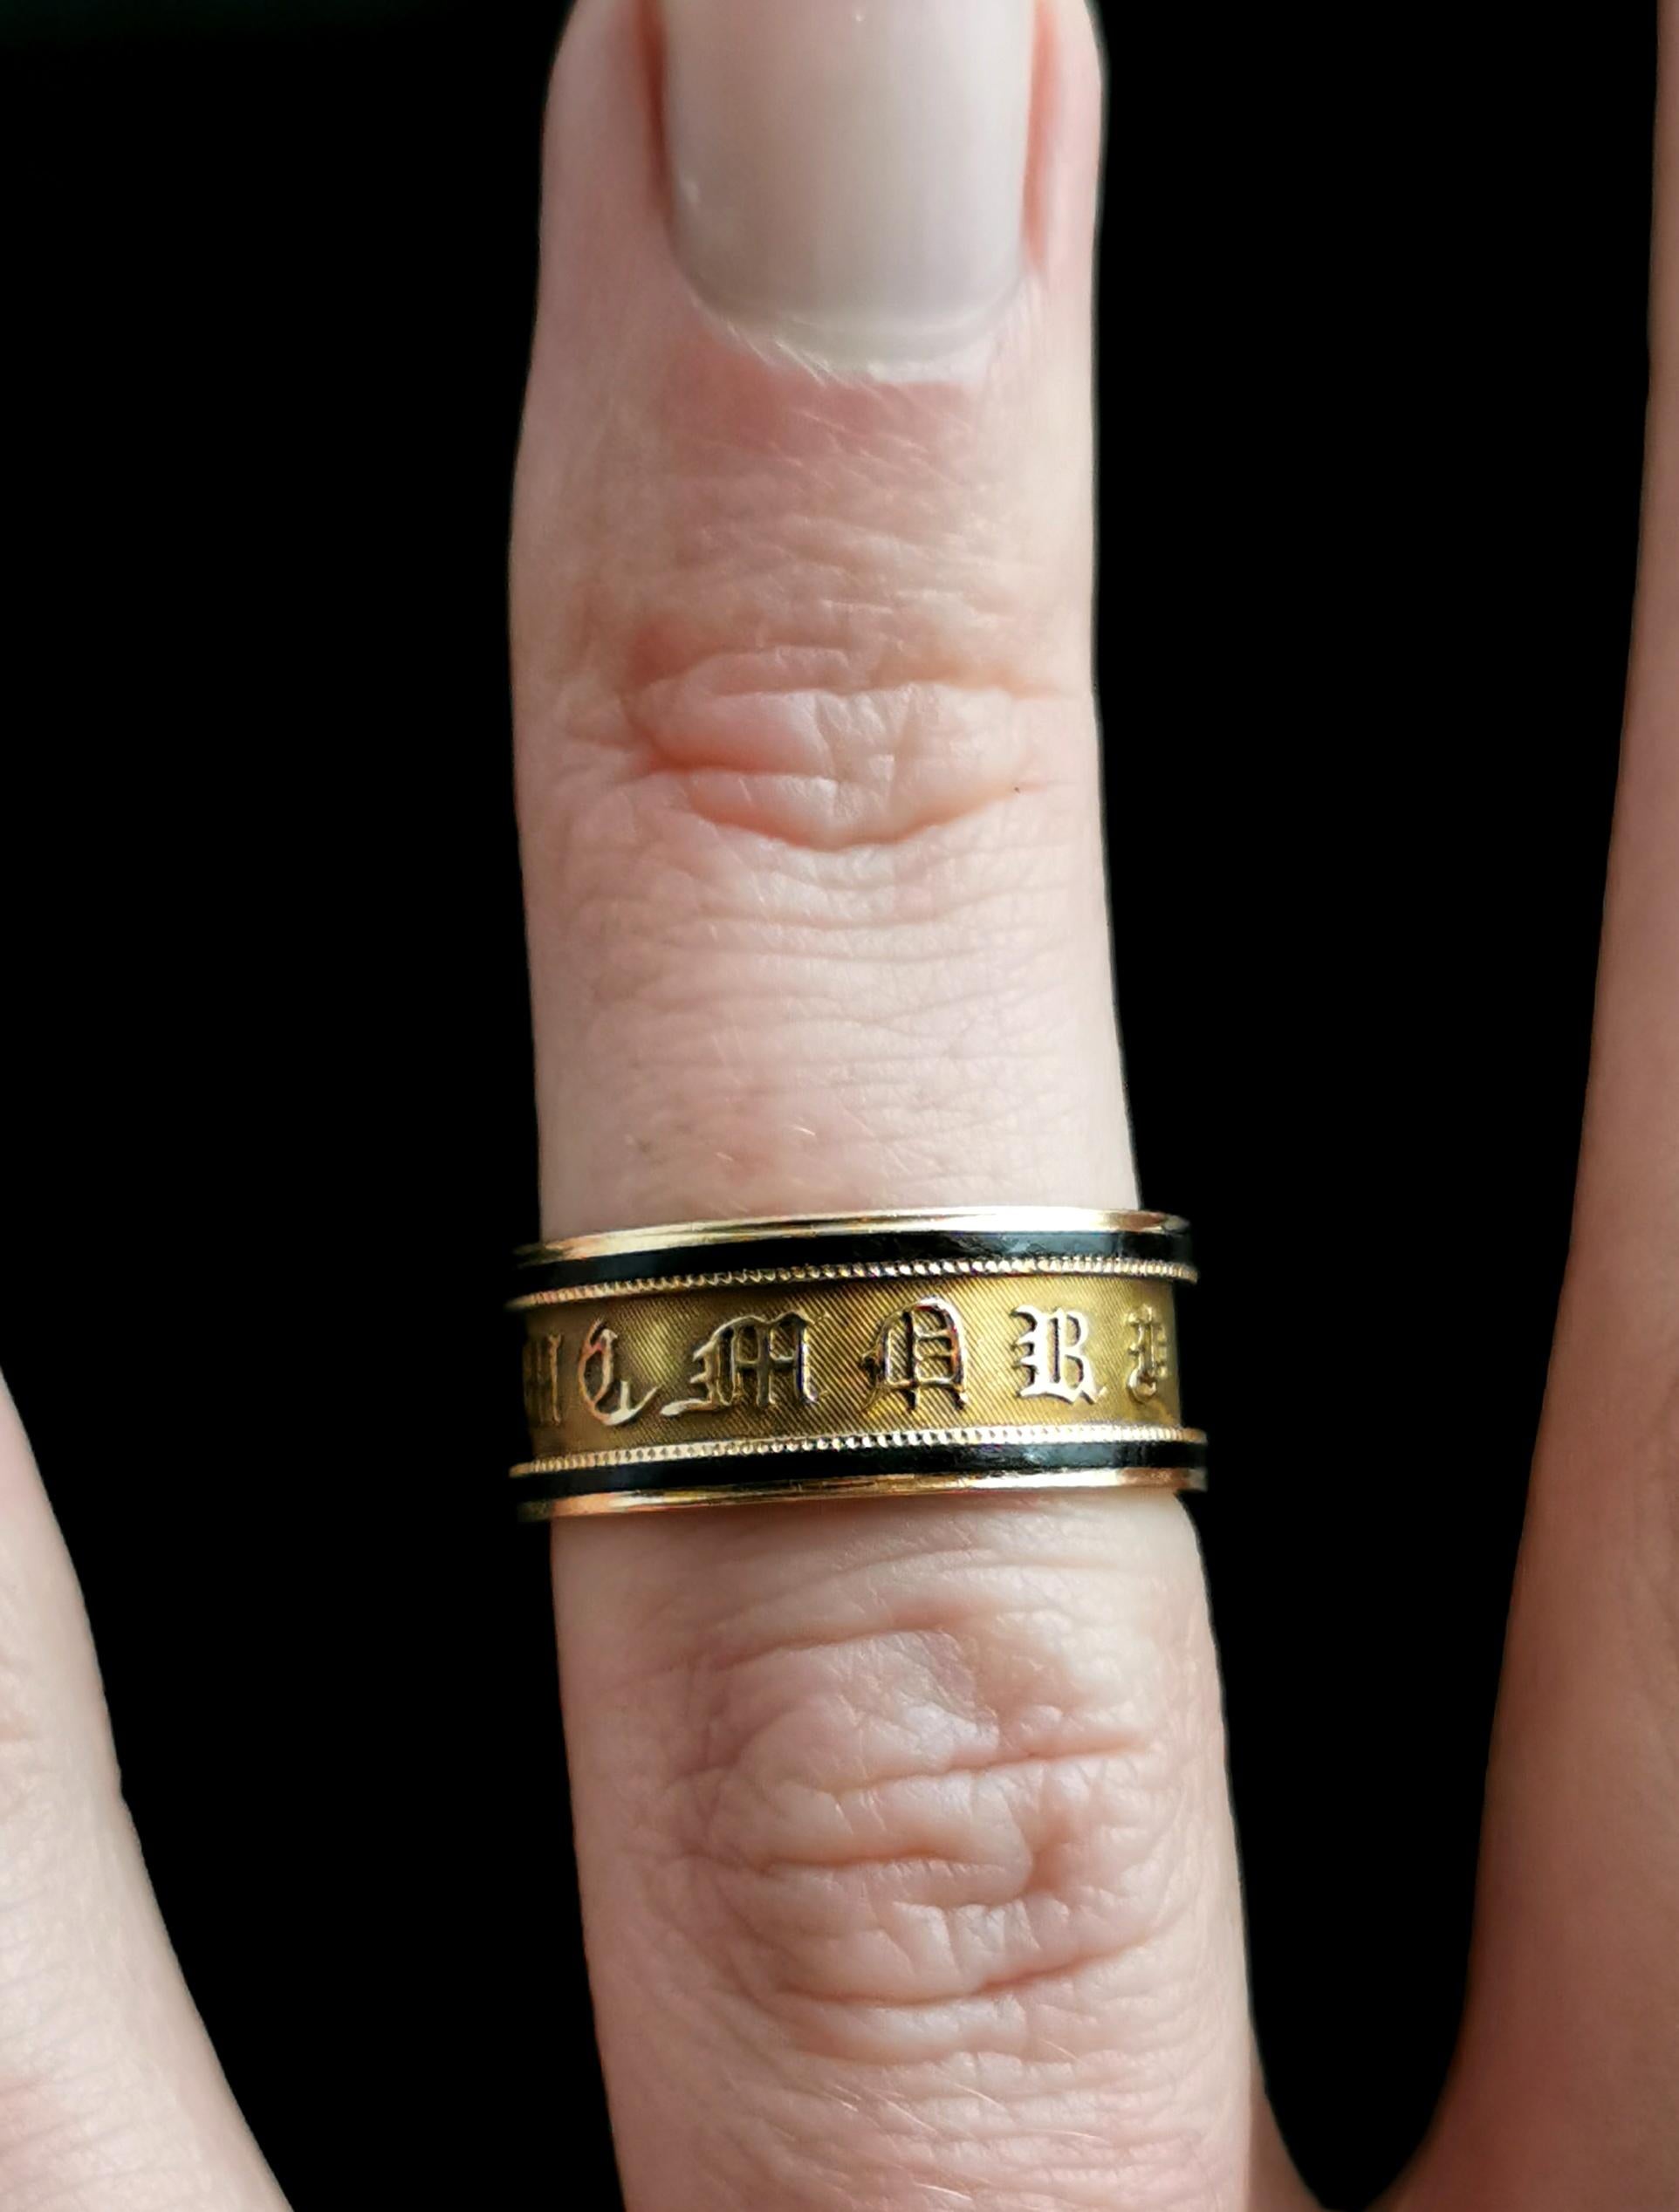 mourning ring antique